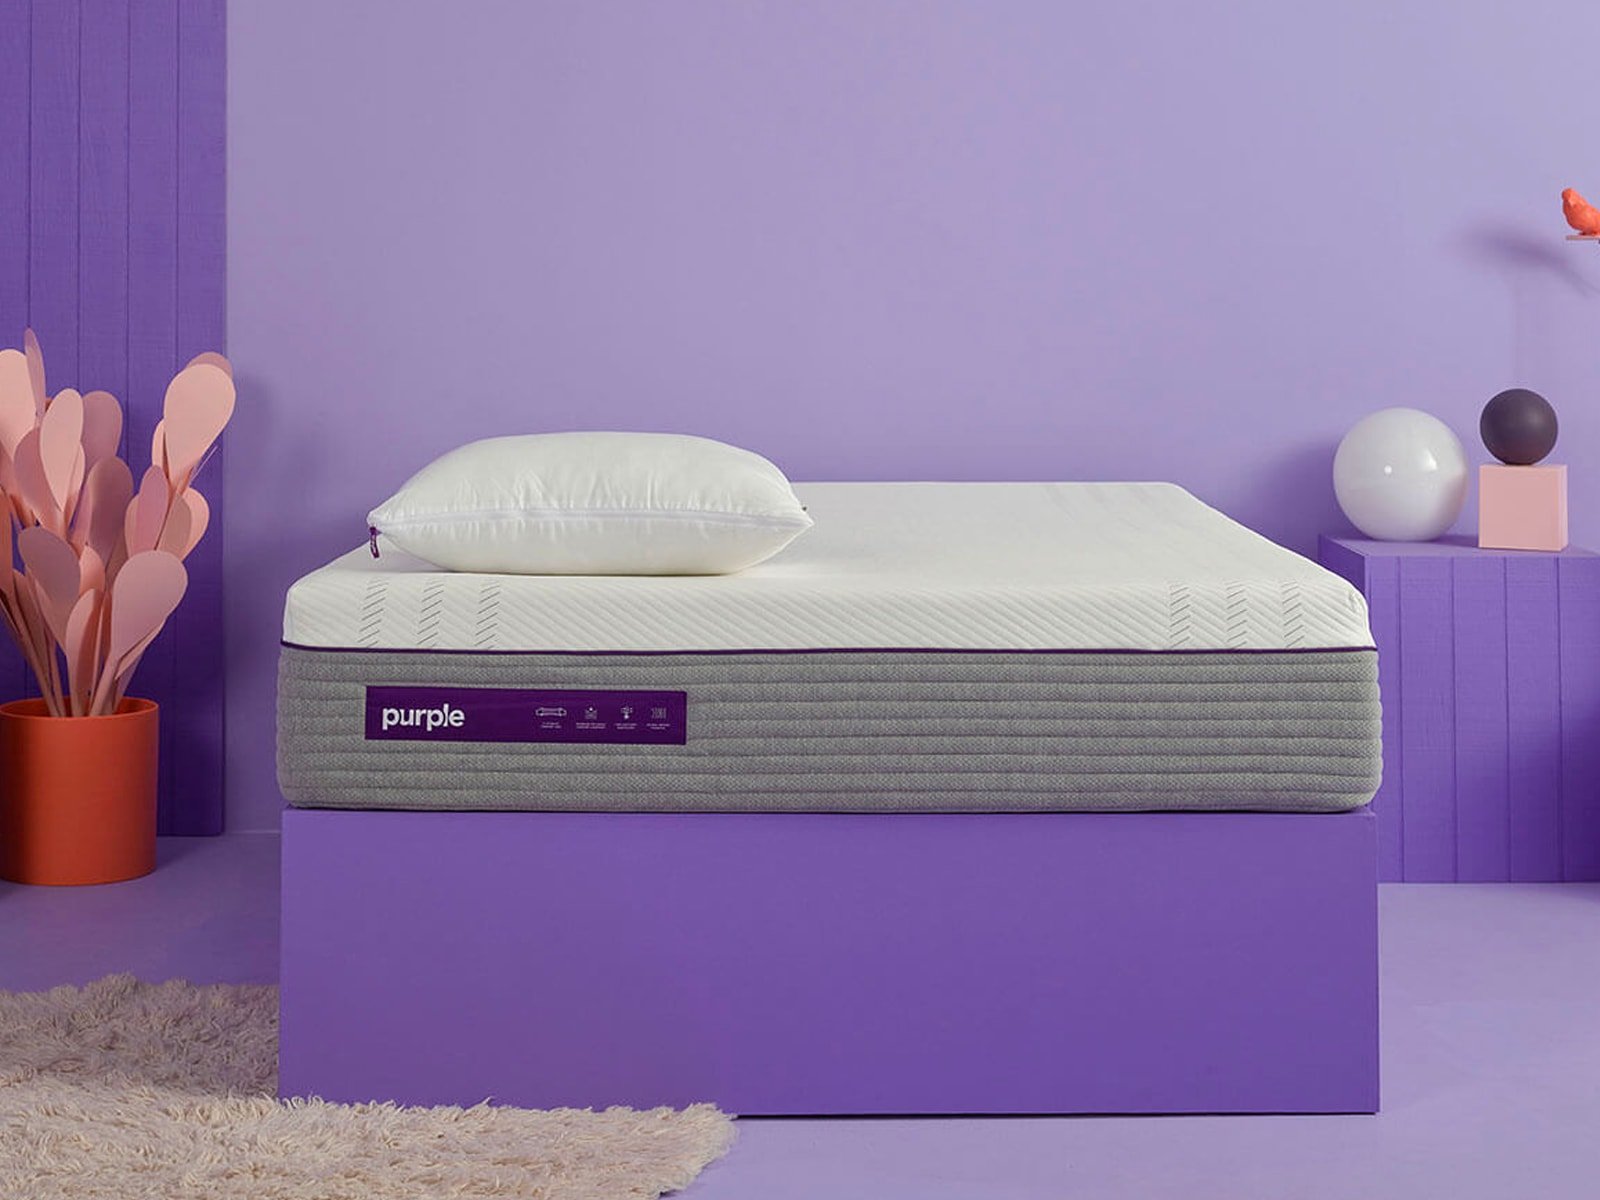 Best Mattress For Back Pain (Plus 10 Other Mattresses)